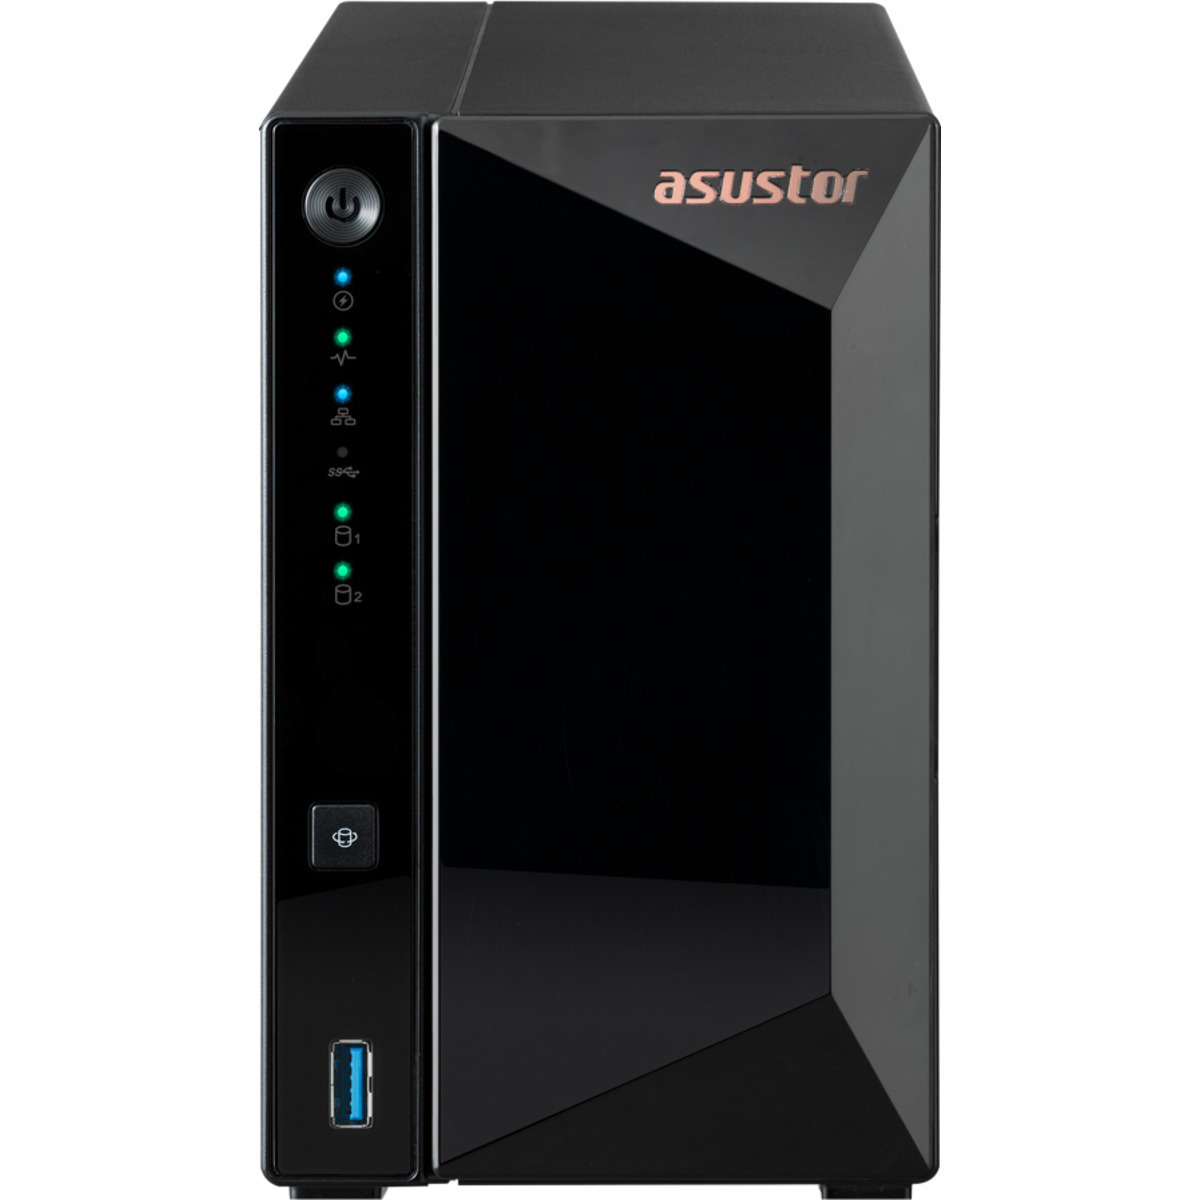 ASUSTOR DRIVESTOR 2 Pro AS3302T 32tb 2-Bay Desktop Personal / Basic Home / Small Office NAS - Network Attached Storage Device 2x16tb Seagate EXOS X18 ST16000NM000J 3.5 7200rpm SATA 6Gb/s HDD ENTERPRISE Class Drives Installed - Burn-In Tested DRIVESTOR 2 Pro AS3302T